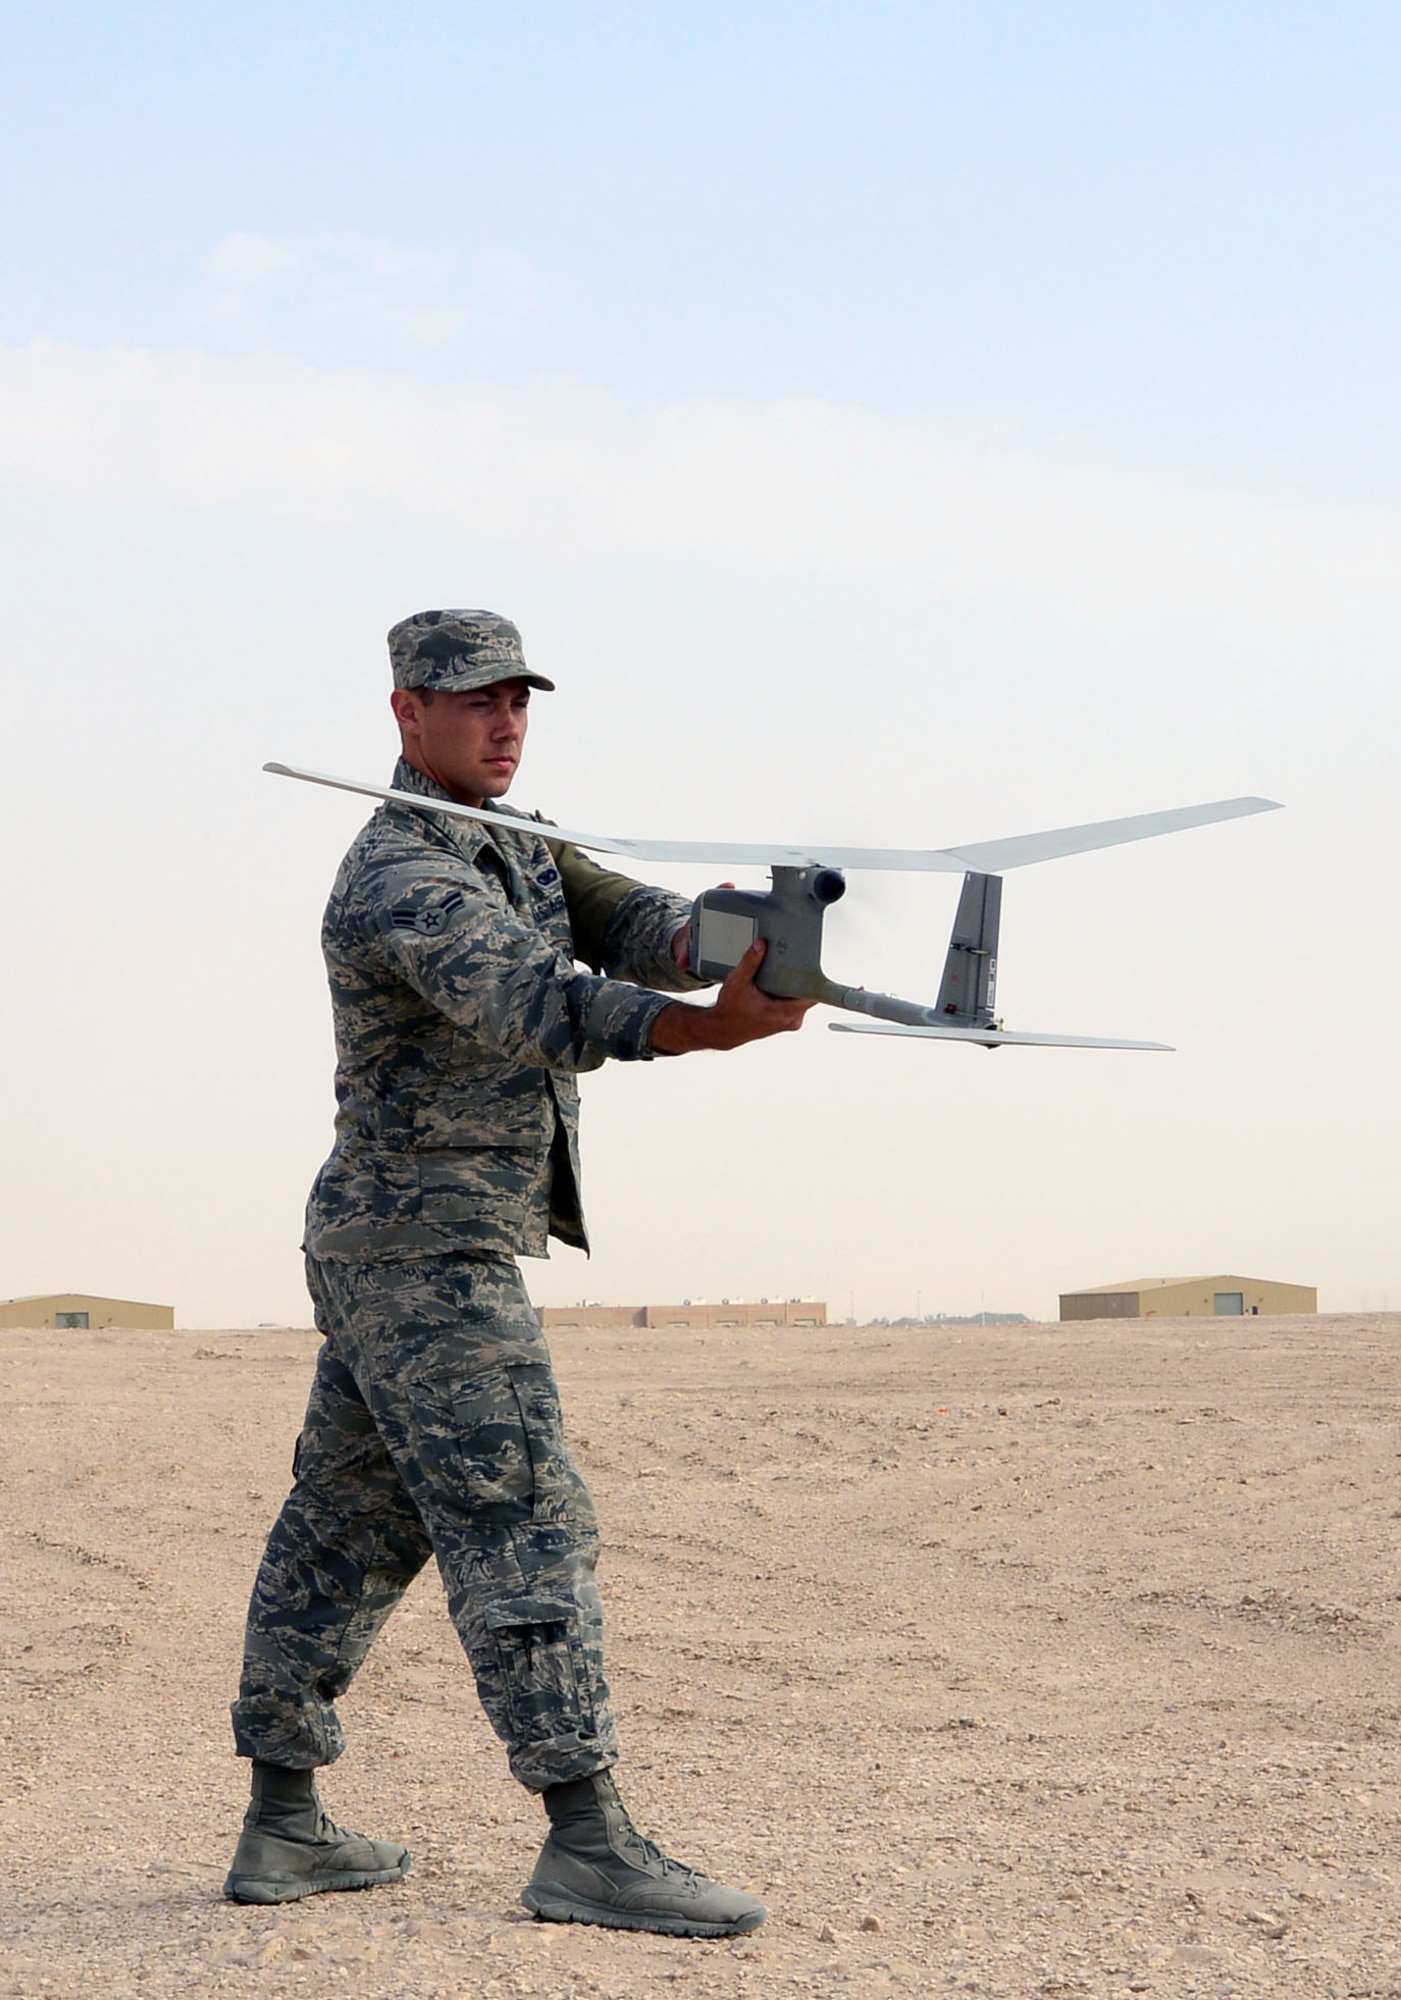 Airman Michael Puckett, 379th Expeditionary Security Forces Squadron, launches an R-11B Raven into the “wild blue yonder” during a demonstration for senior Qatari Air Force and 379th Air Expeditionary Wing leaders, Mar 4, 2015, at Al Udeid Air Base, Qatar.  The RQ-11 Raven is a lightweight unmanned aircraft system that’s designed for rapid deployment and high-mobility for military operations. At Al Udeid, security forces Airmen use the Raven to support anti-terrorism measures like day or night aerial intelligence, surveillance, target acquisition, and reconnaissance. This is the first time since 2005 that the Raven has been used at Al Udeid. (Air Force photo by Master Sgt. Kerry Jackson) 